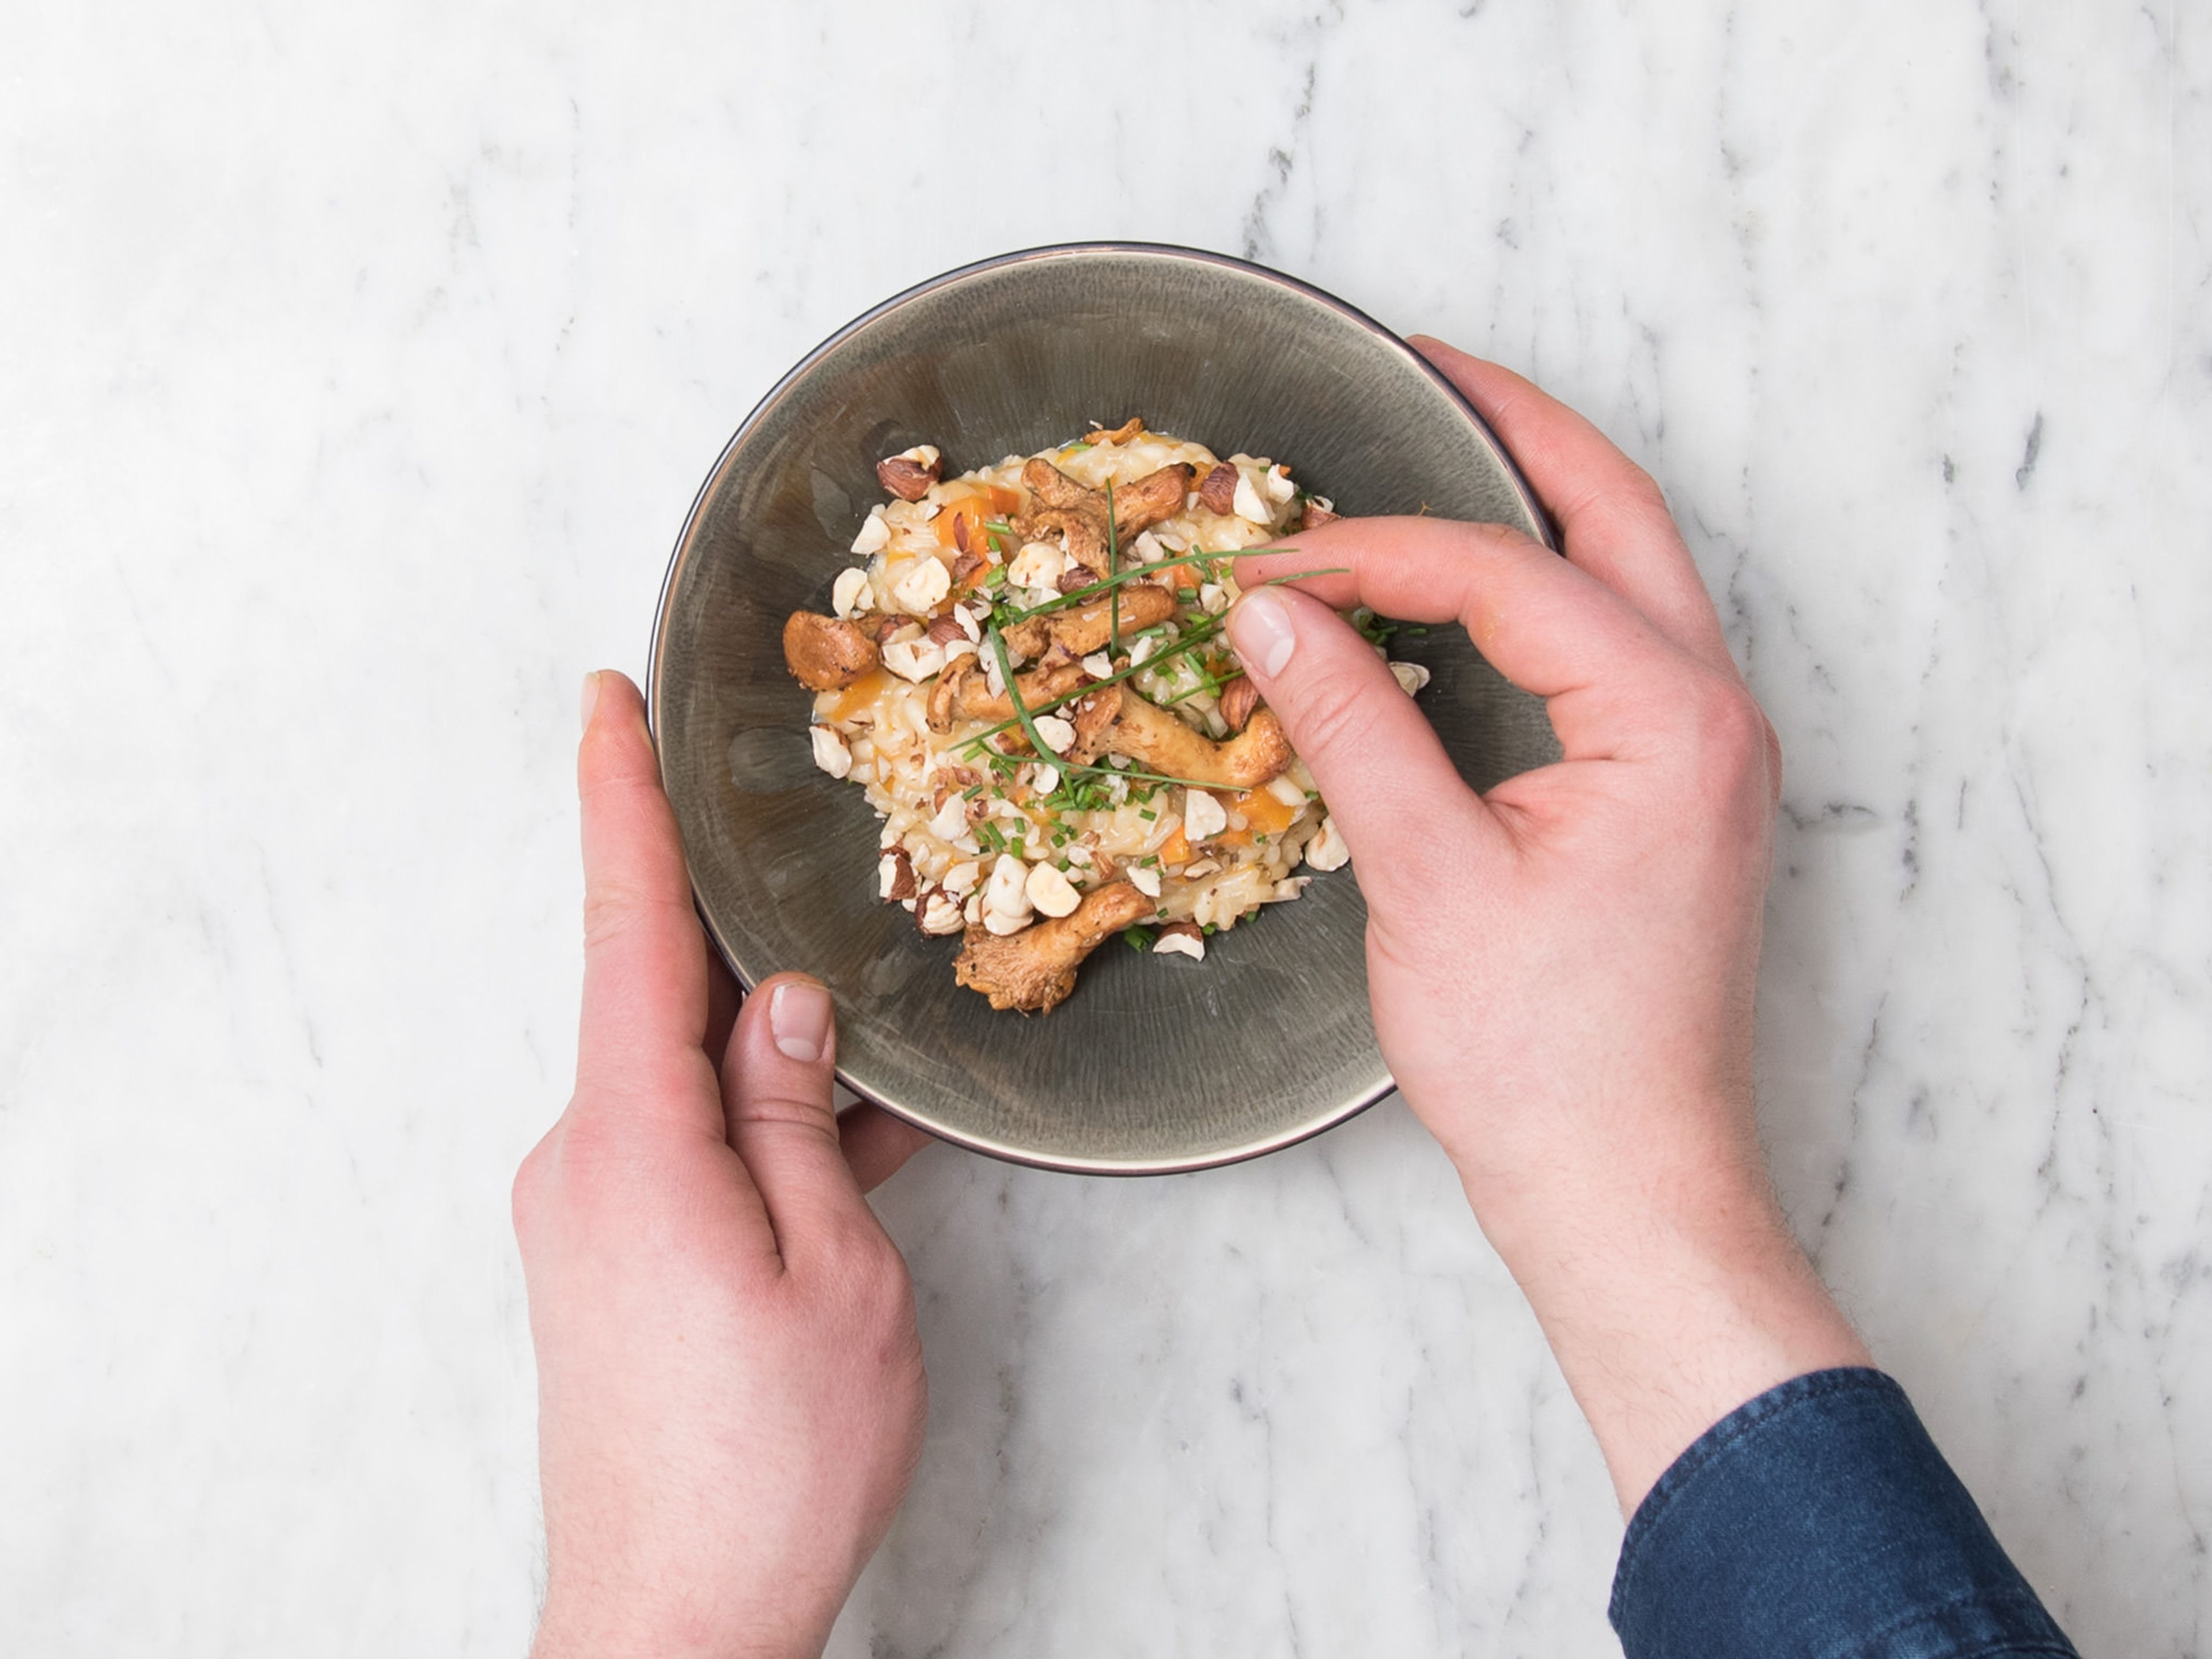 Divide the risotto between plates or bowls and arrange the chanterelles on top. Sprinkle with the hazelnuts, chives, and additional Parmesan cheese. Season to taste with salt and pepper. Enjoy!